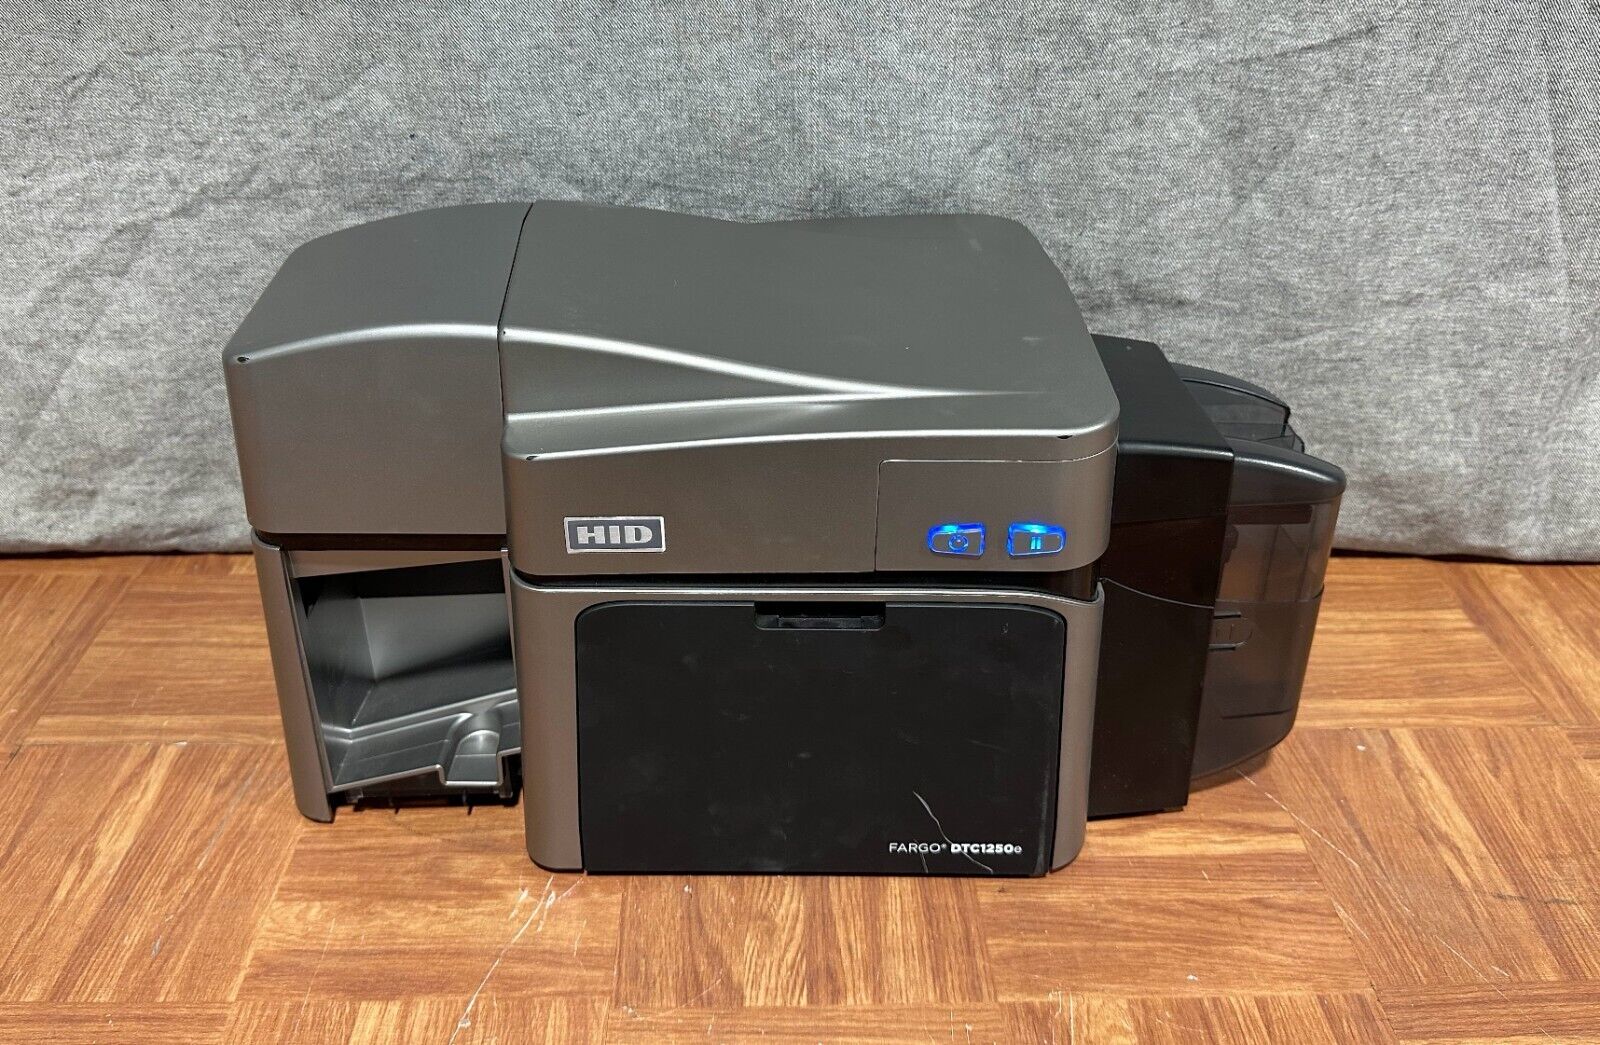 POWER TESTED HID Global Fargo DTC1250e Color Business ID Direct-To-Card Printer